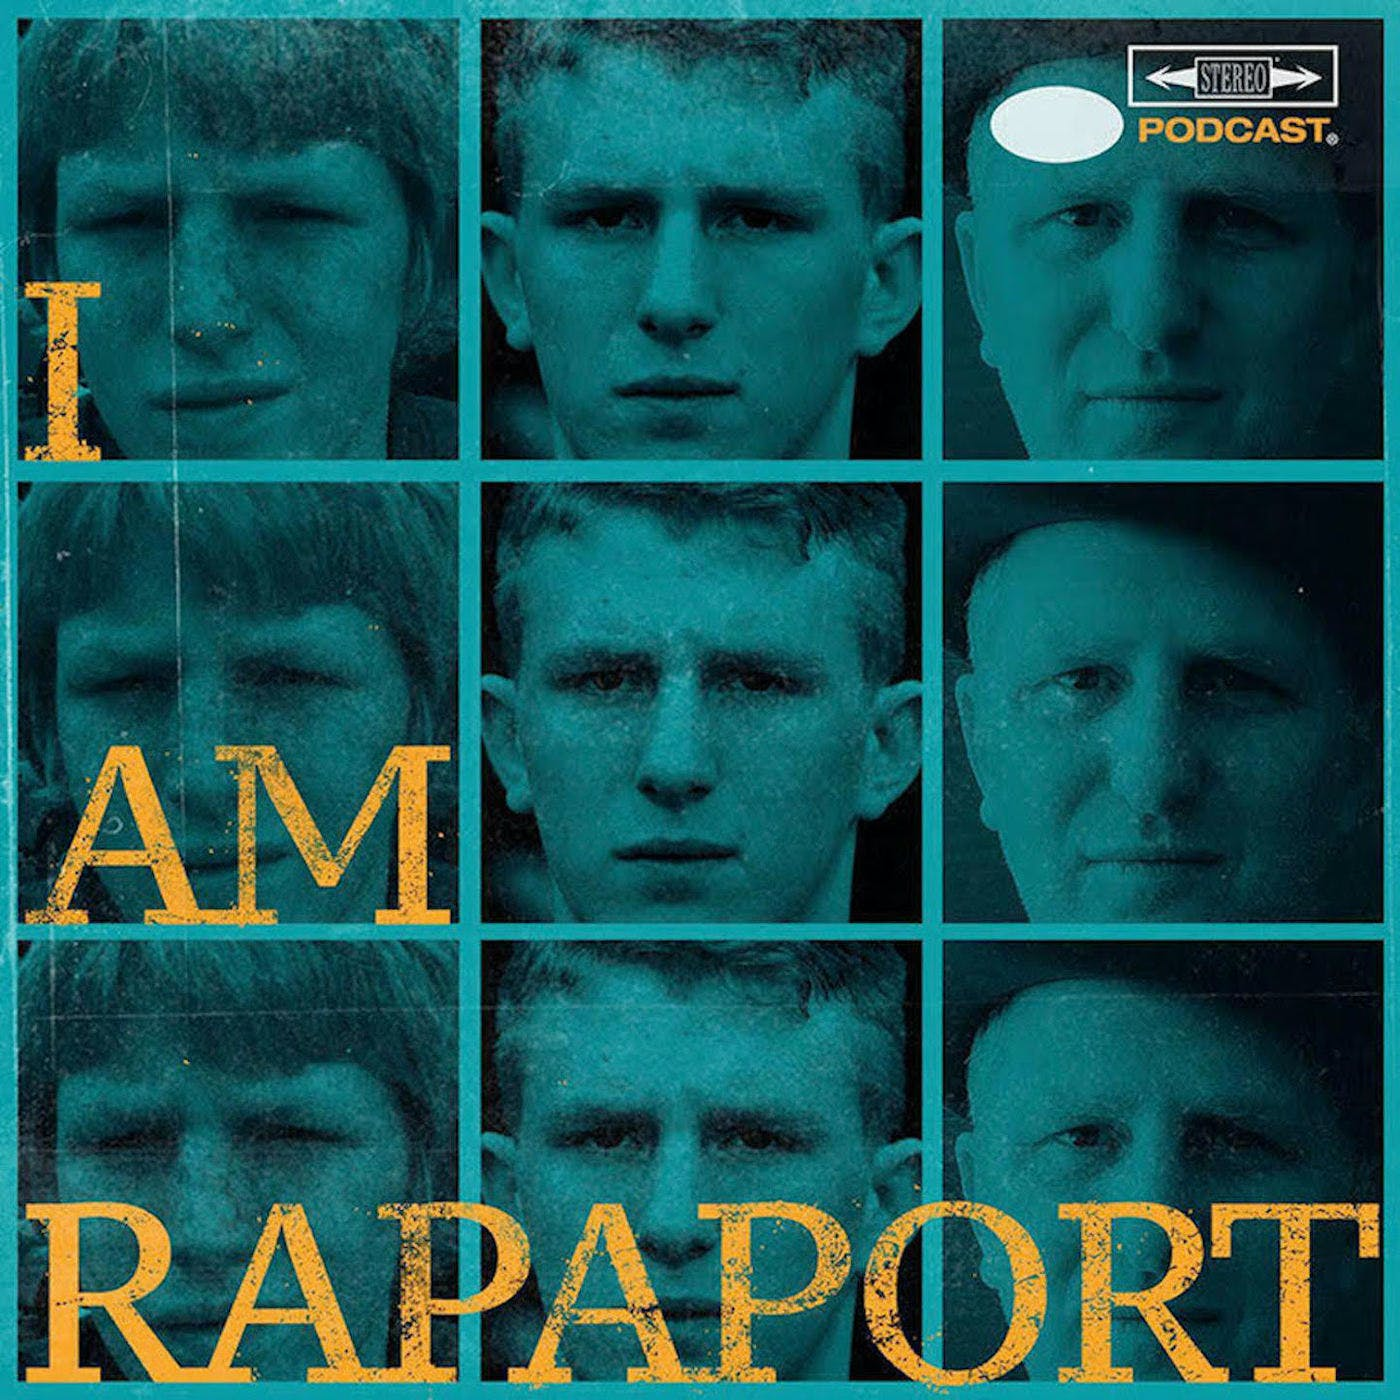 EP 416 - I AM RAPAPORT APP LAUNCH/KANYE WEST GETS THAT WILLIE HUTCH TREATMENT/LeGoaltend/SAQUON BARKLEY ON NYG/OH SKEETER! IS GUILTY/SICK F*CKS OTW